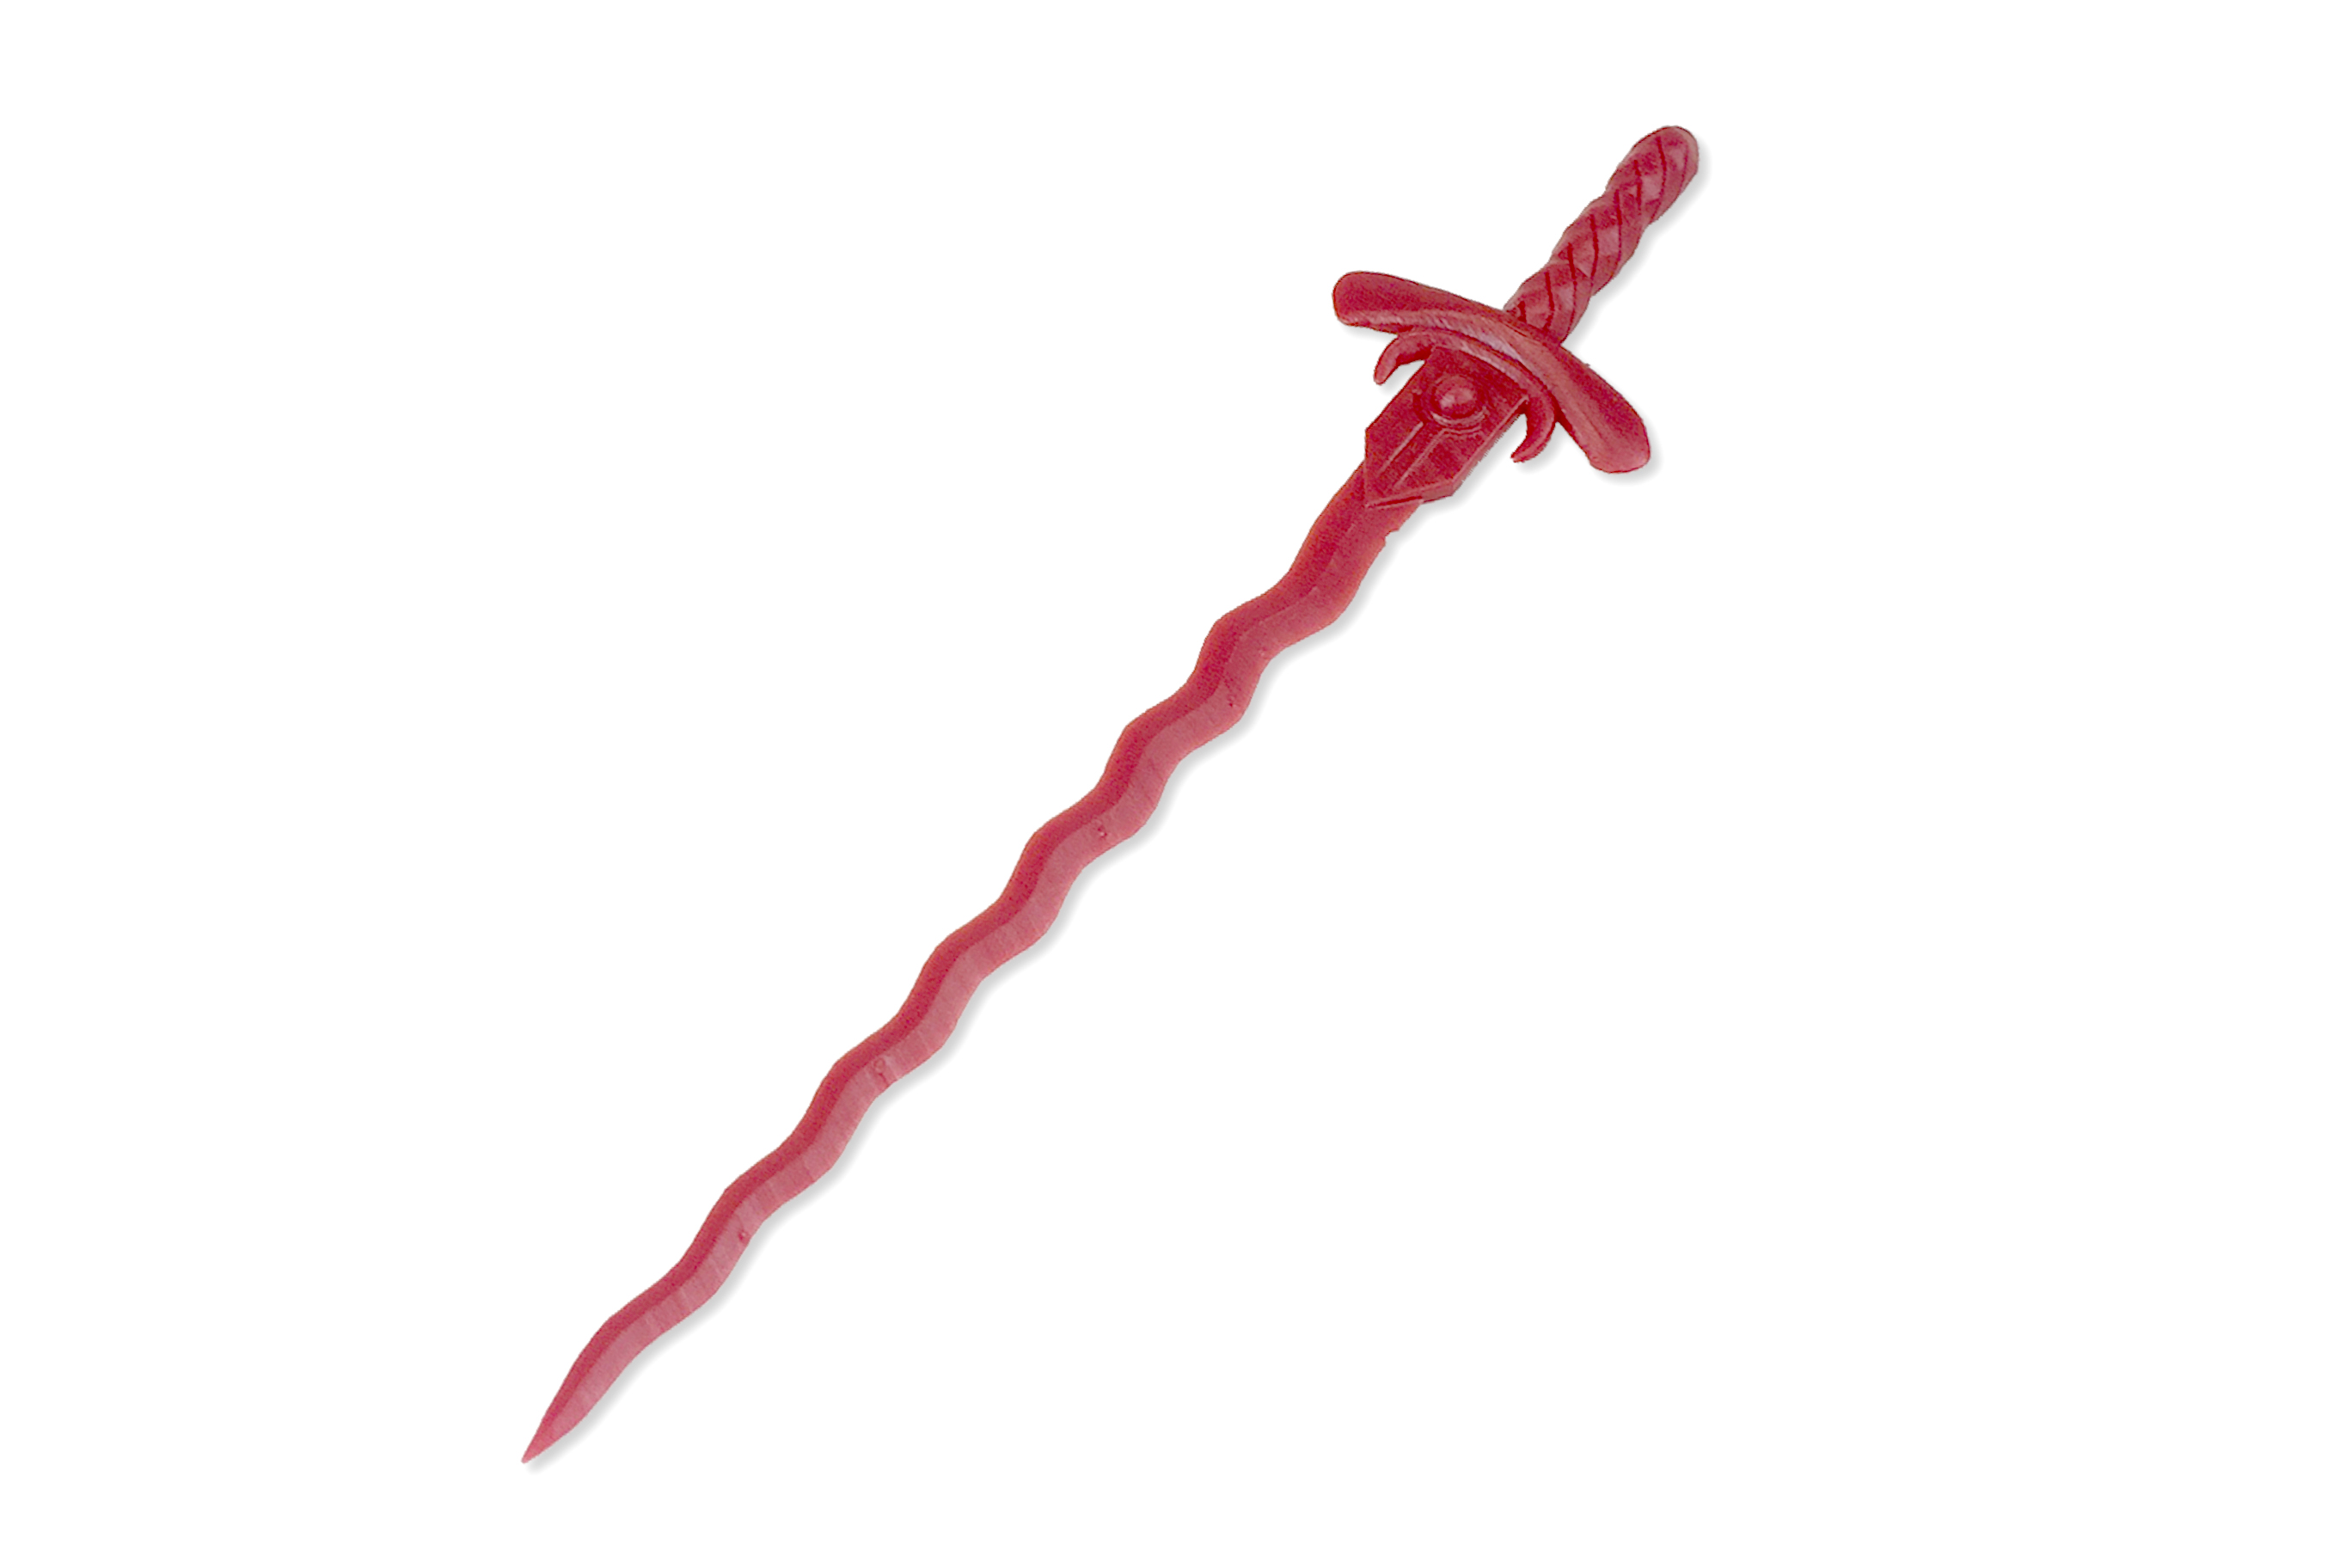 Flame-bladed sword